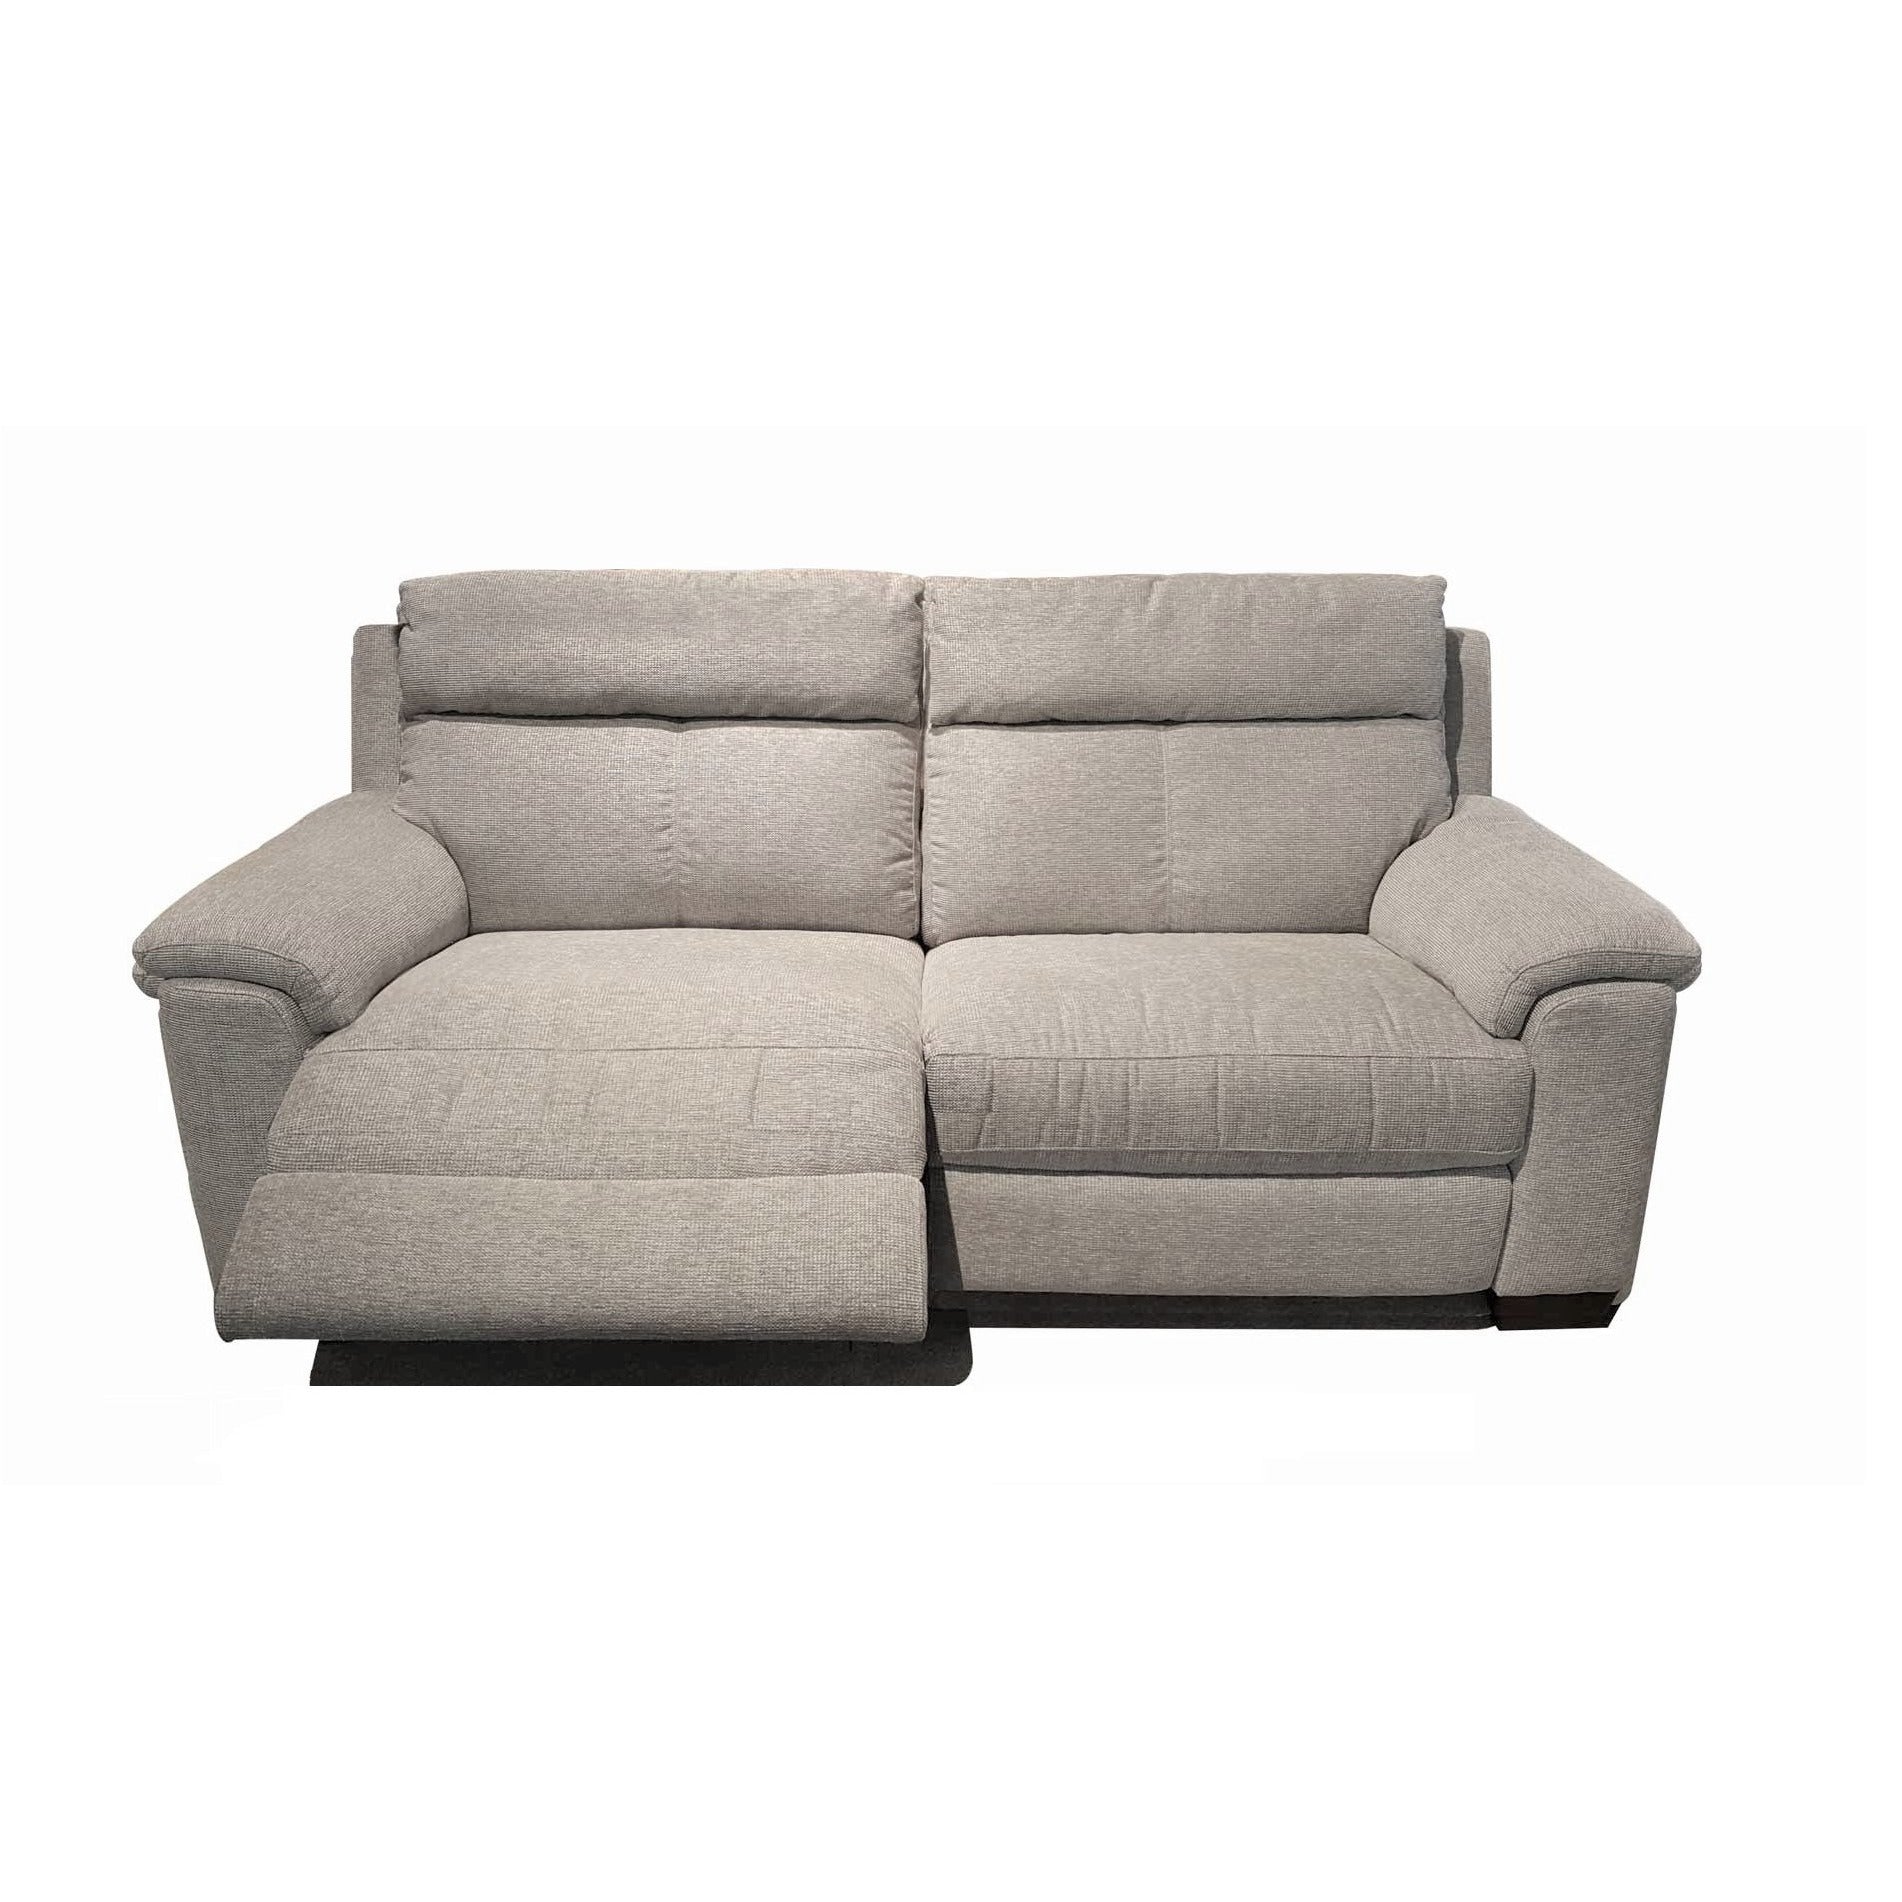 Thompson 2.5 Seater Electric Reclining Sofa